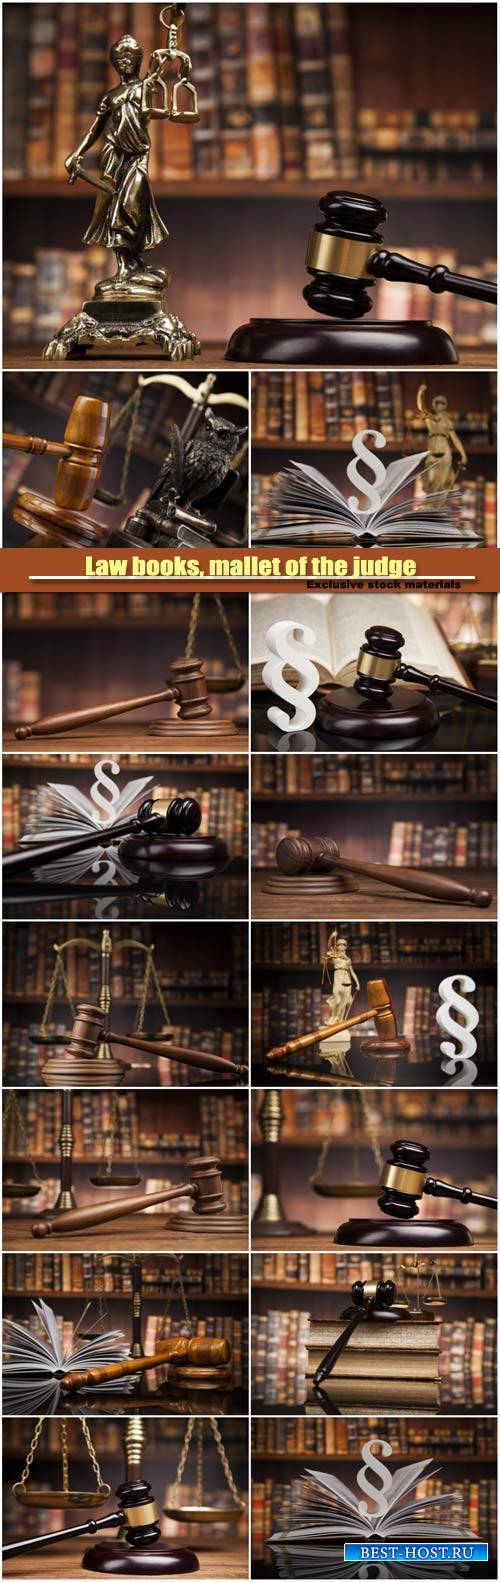 Law books, mallet of the judge, paragraph justice concept, law theme